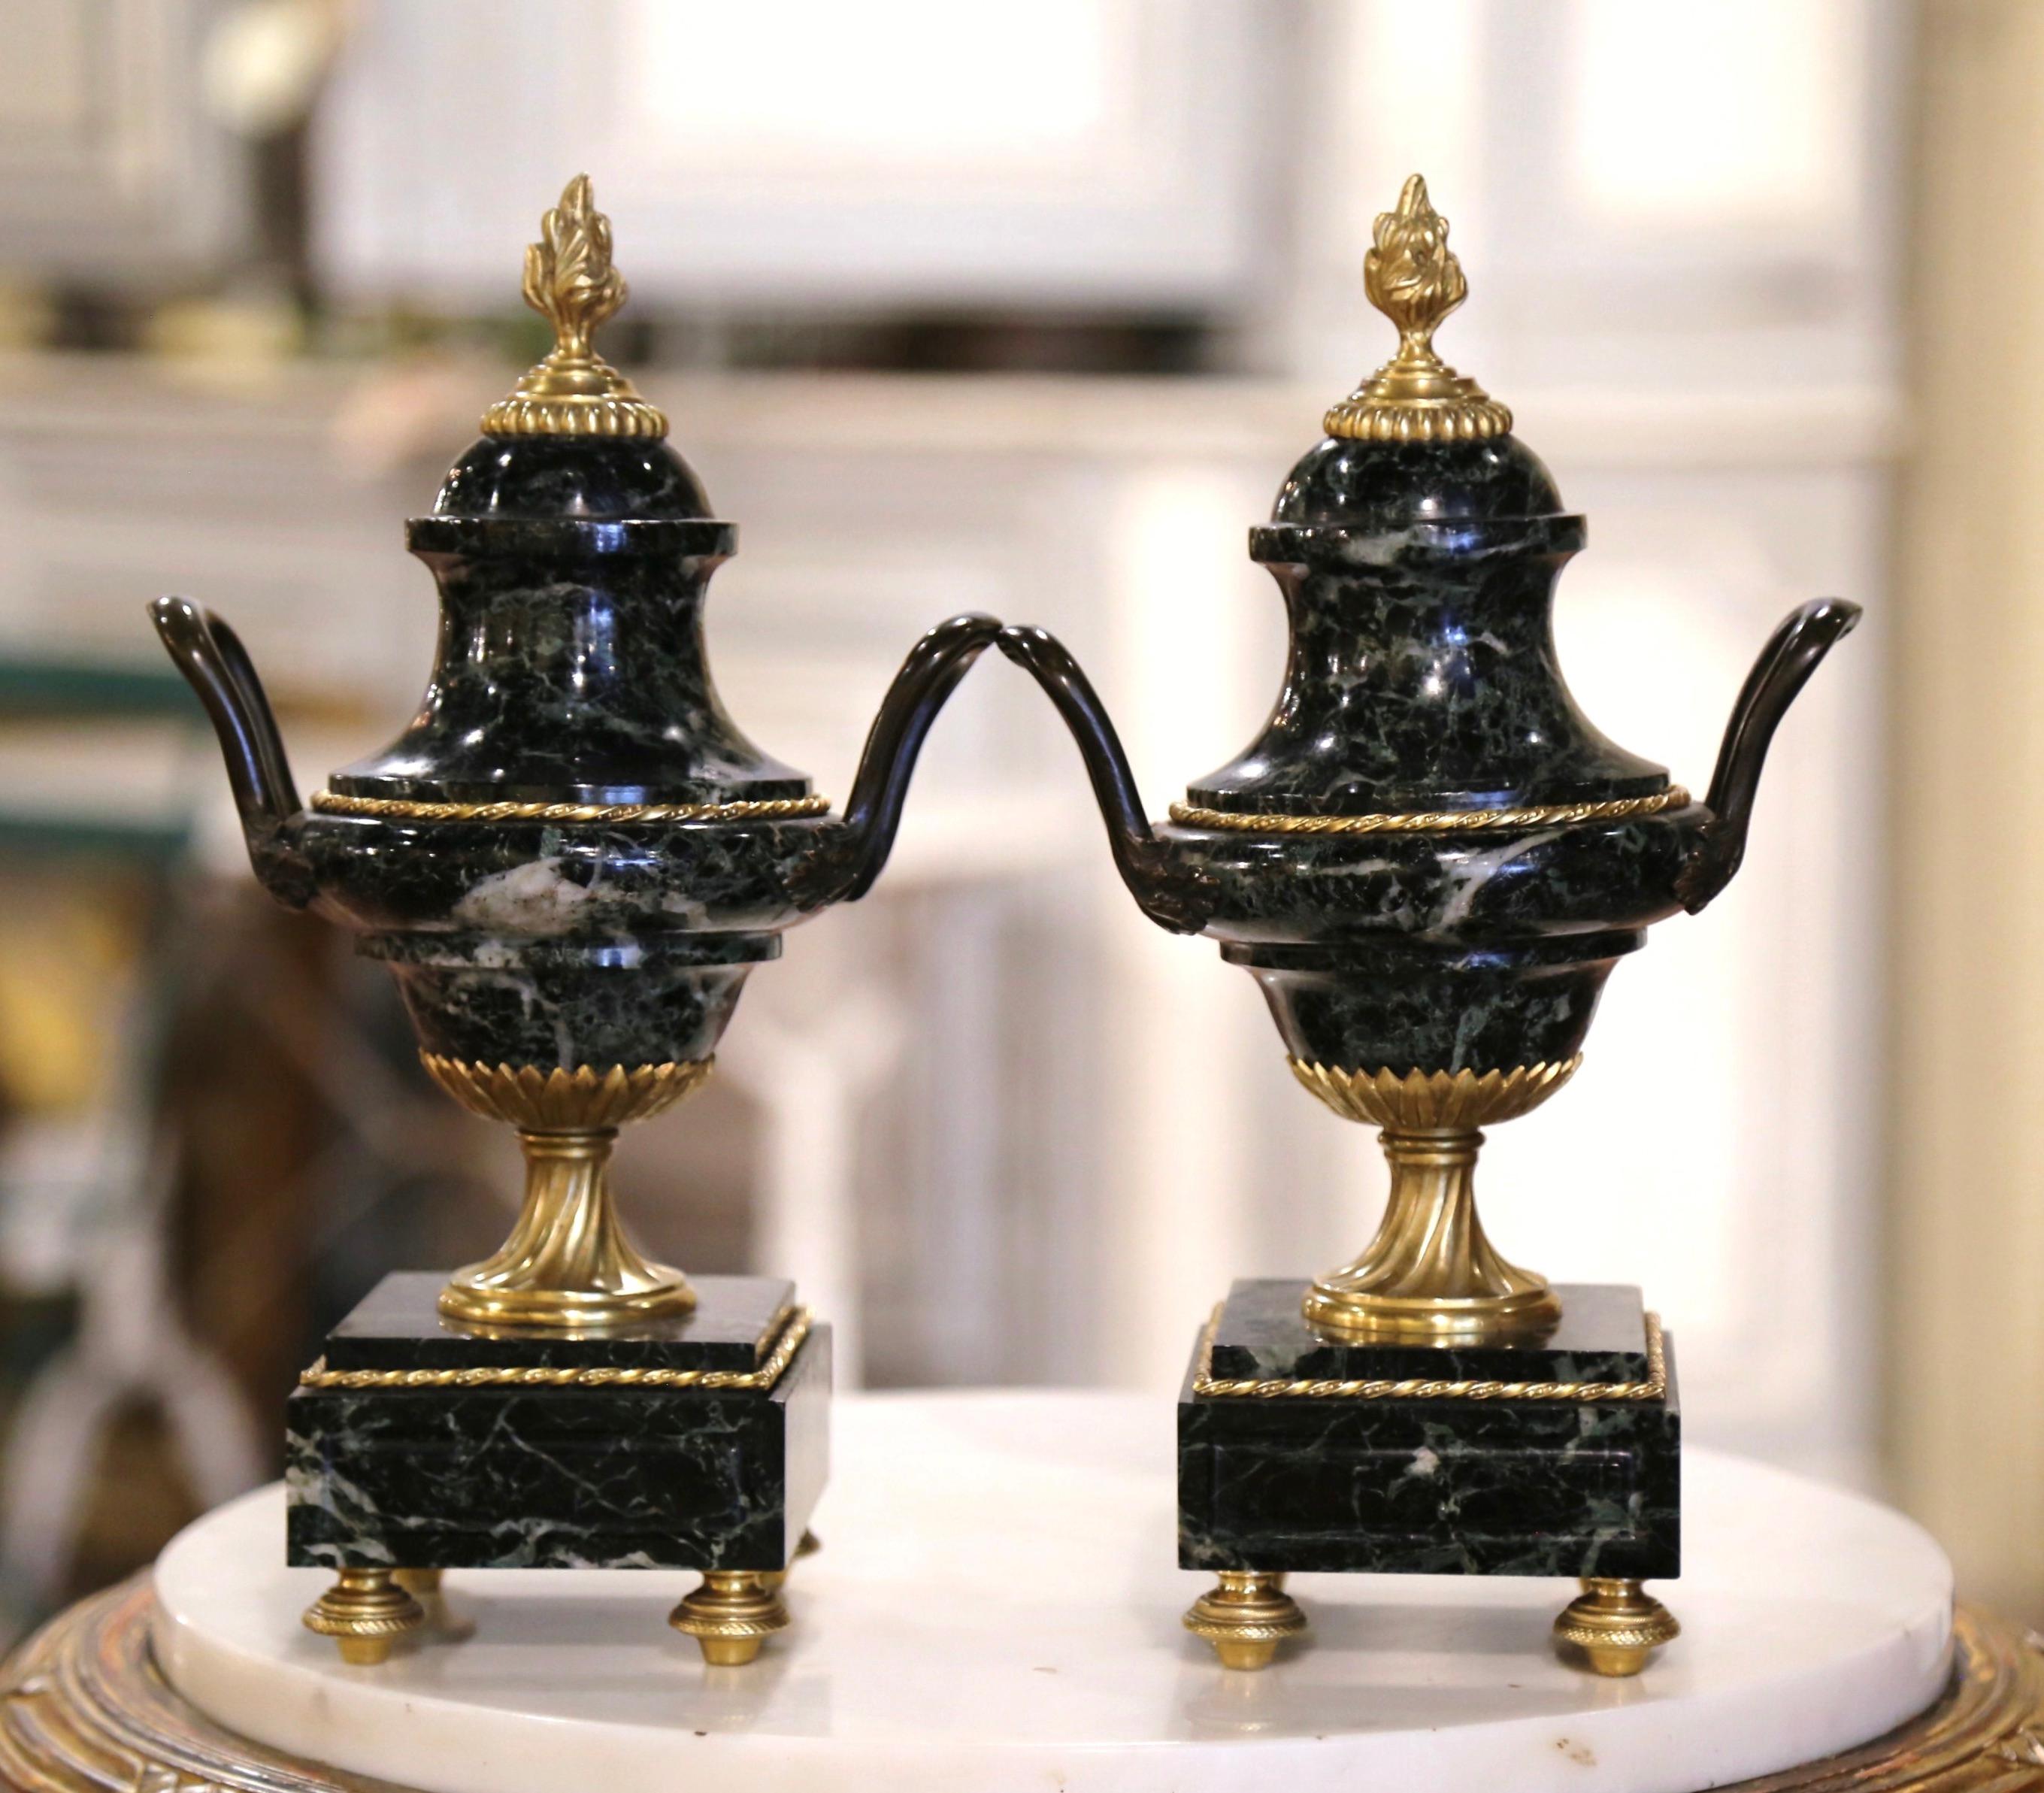 Crafted in France, circa 1890, these antique urns are carved of marble and stand on square bases ending with bronze rounded feet. Each vessel with bronze ring motif around, is dressed with a dome shaped lid embellished with a bronze flame form